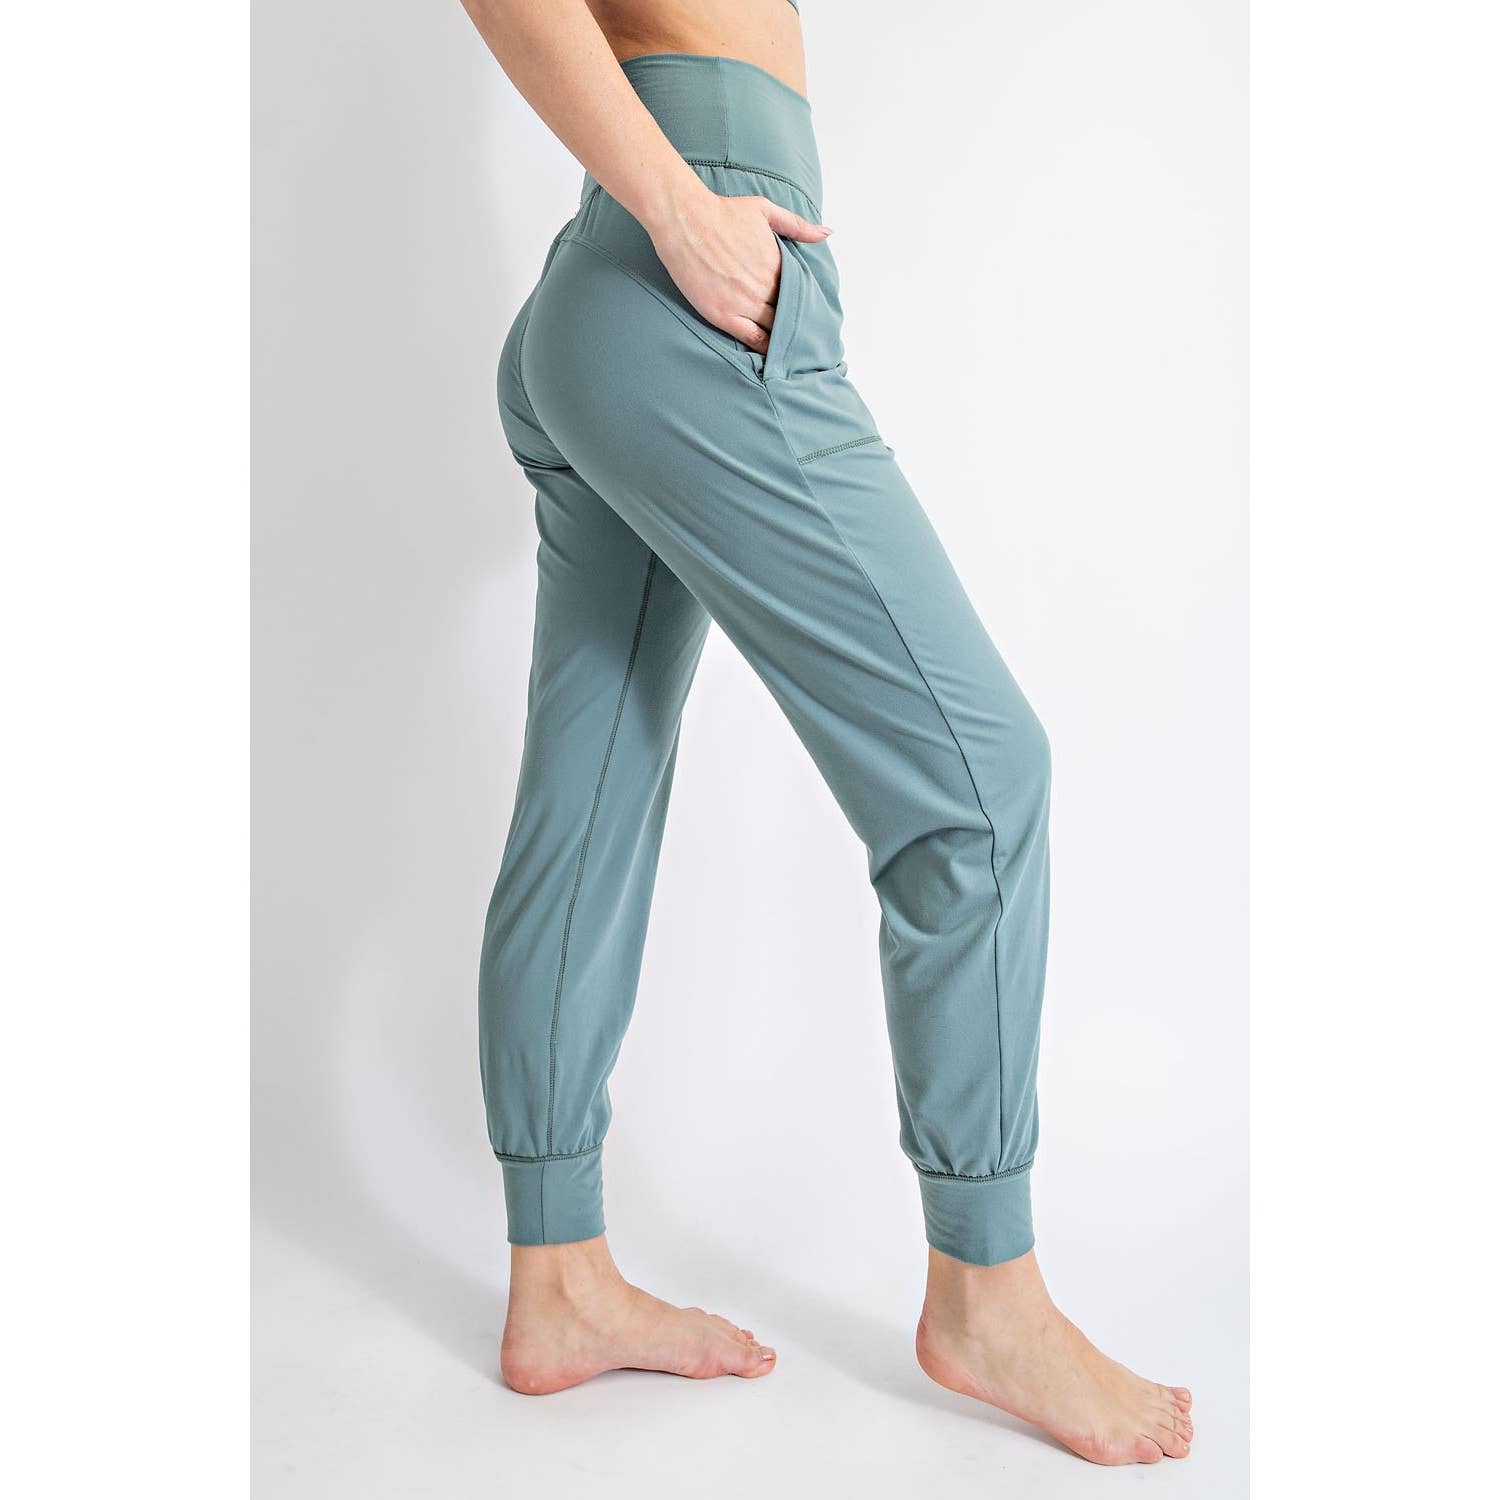 RM JOGGERS POCKETS French Press